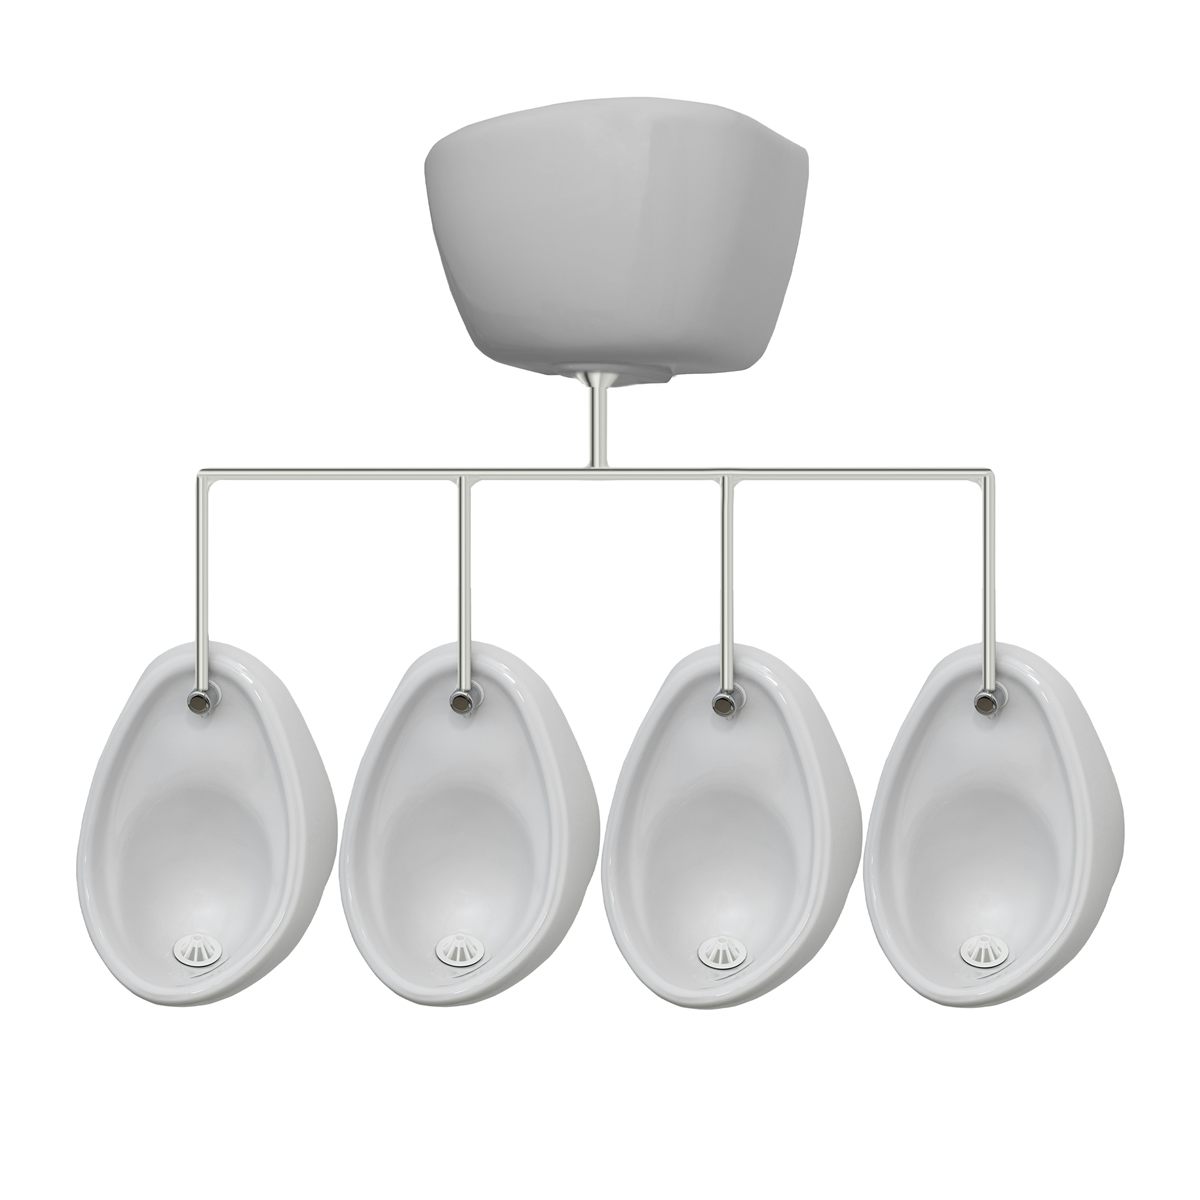 Kirke Curve complete top in exposed urinal 500mm pack for 4 bowls